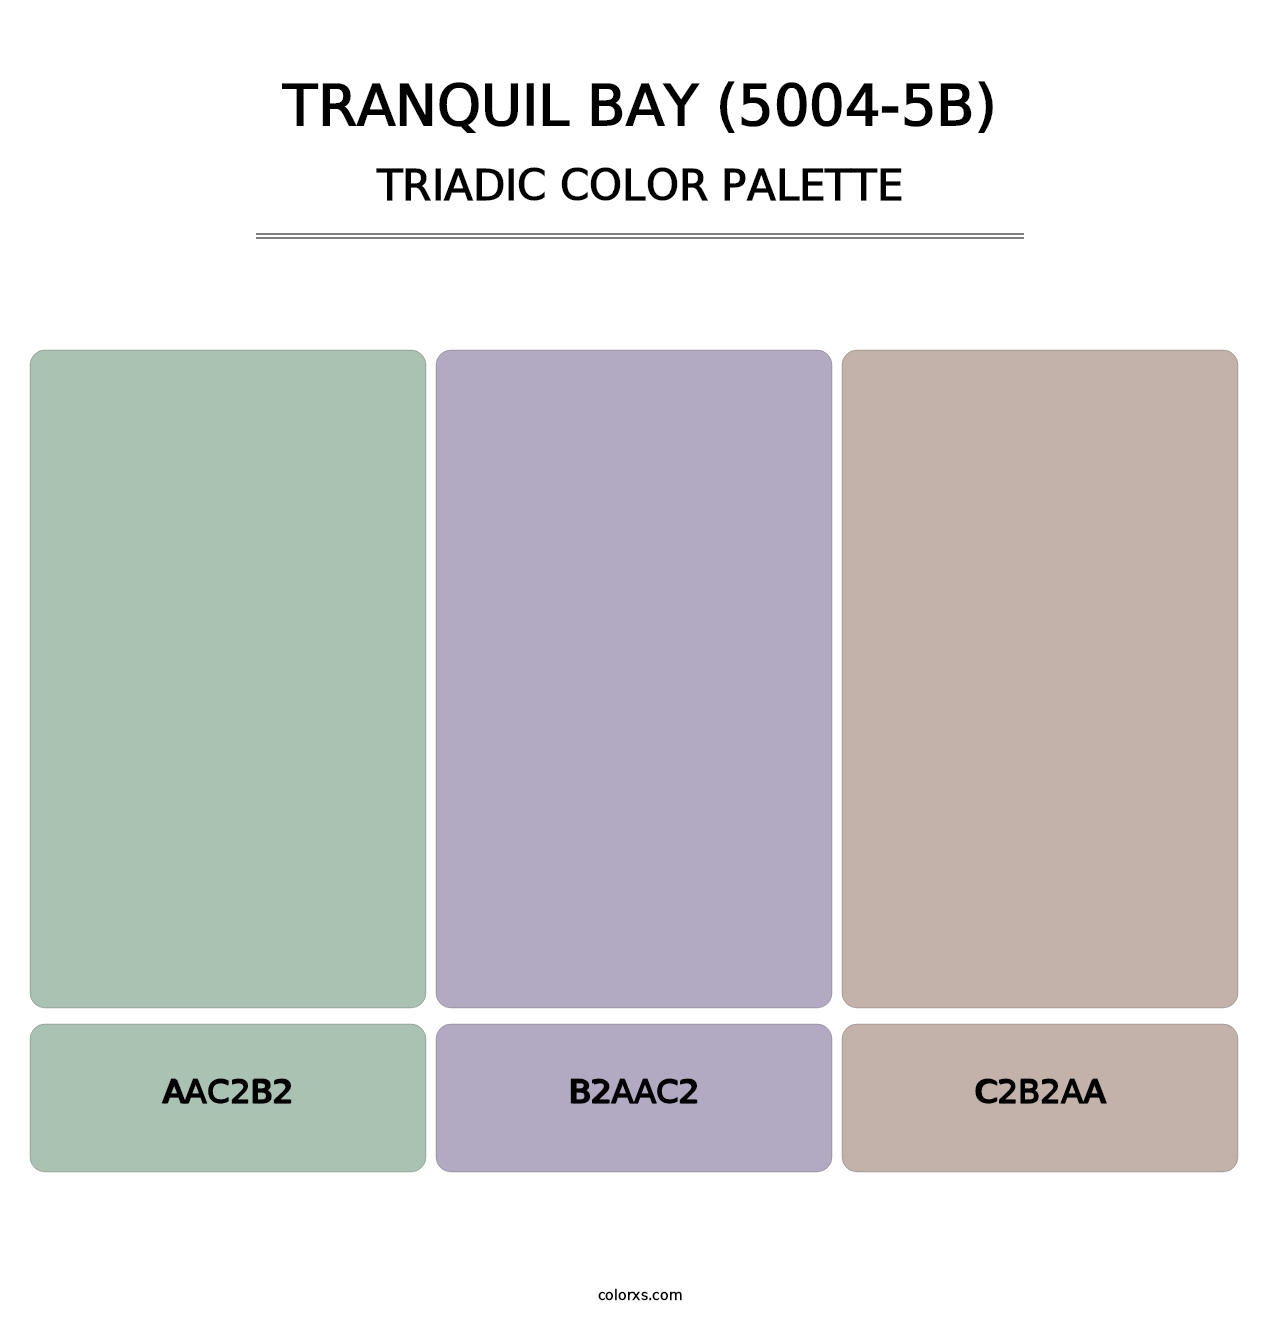 Tranquil Bay (5004-5B) - Triadic Color Palette